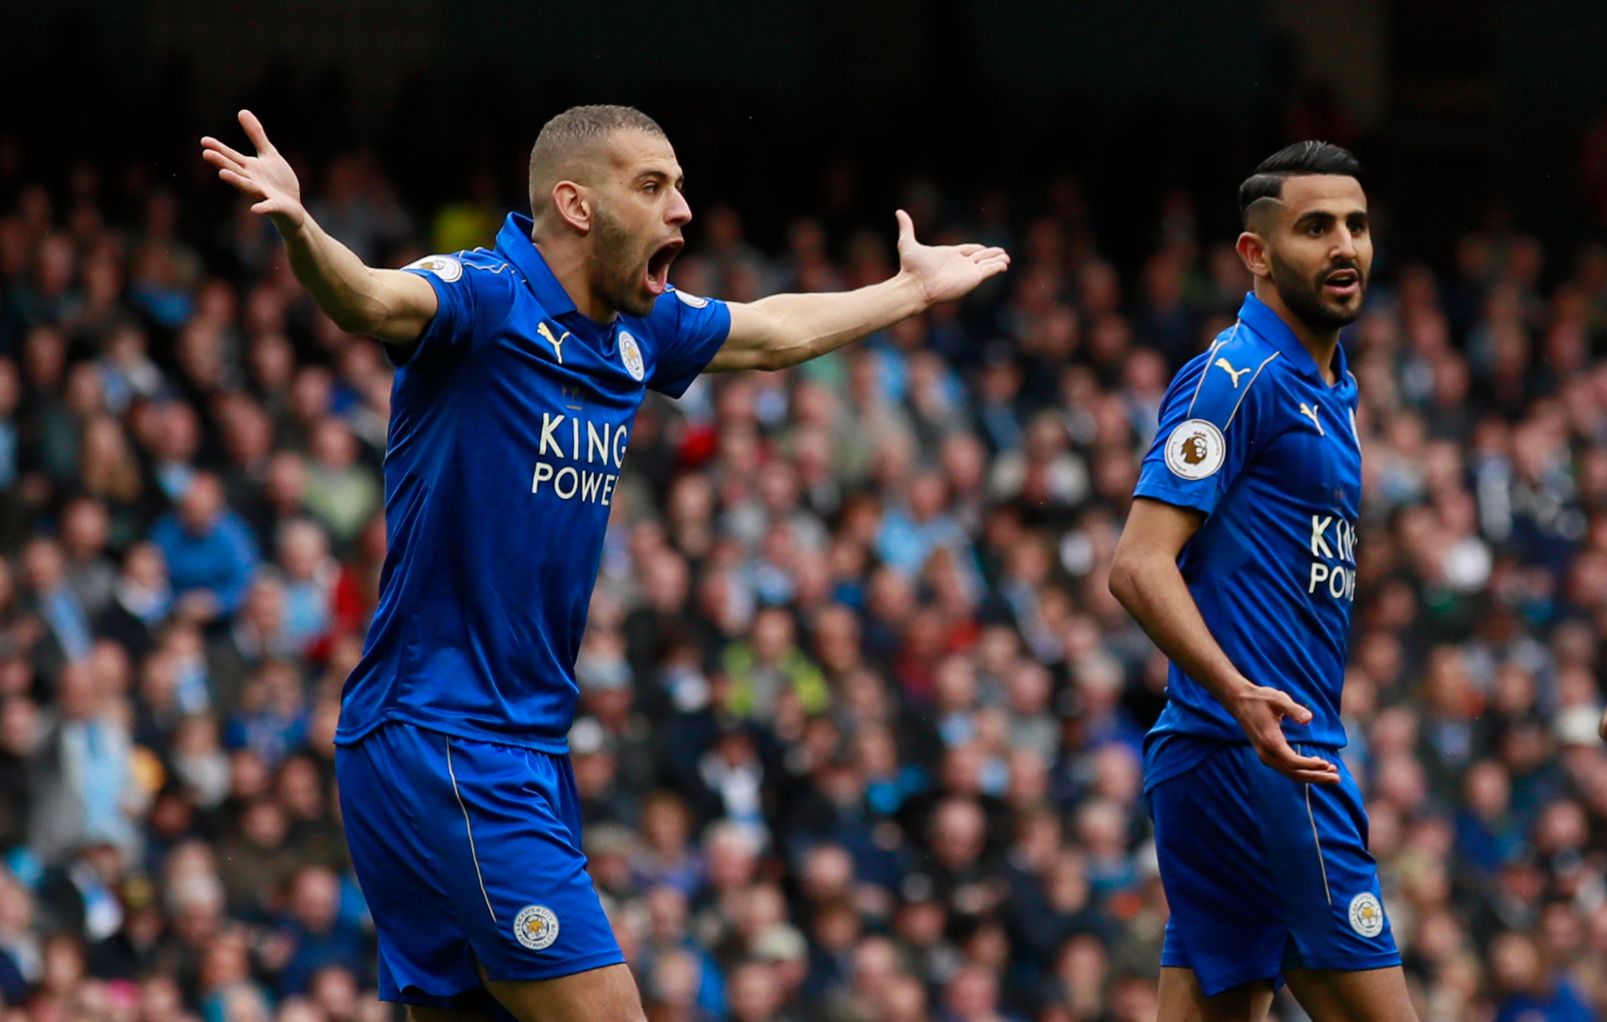 Britain Football Soccer - Manchester City v Leicester City - Premier League - Etihad Stadium - 13/5/17 Leicester City's Islam Slimani appeals after a penalty is disallowed Action Images via Reuters / Jason Cairnduff Livepic EDITORIAL USE ONLY. No use with unauthorized audio, video, data, fixture lists, club/league logos or 